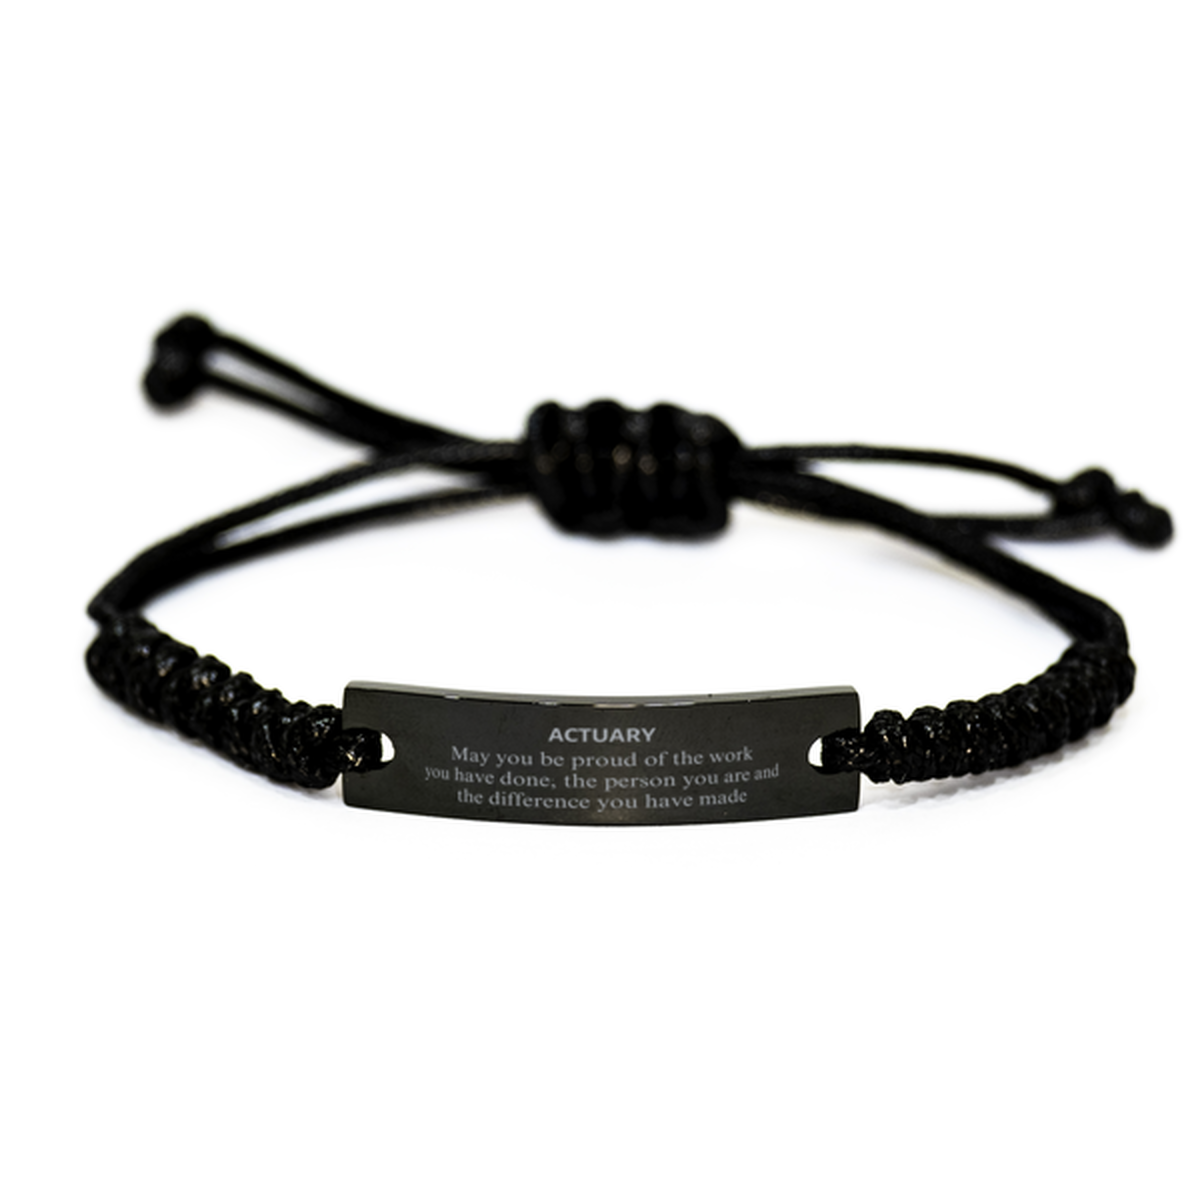 Actuary May you be proud of the work you have done, Retirement Actuary Black Rope Bracelet for Colleague Appreciation Gifts Amazing for Actuary